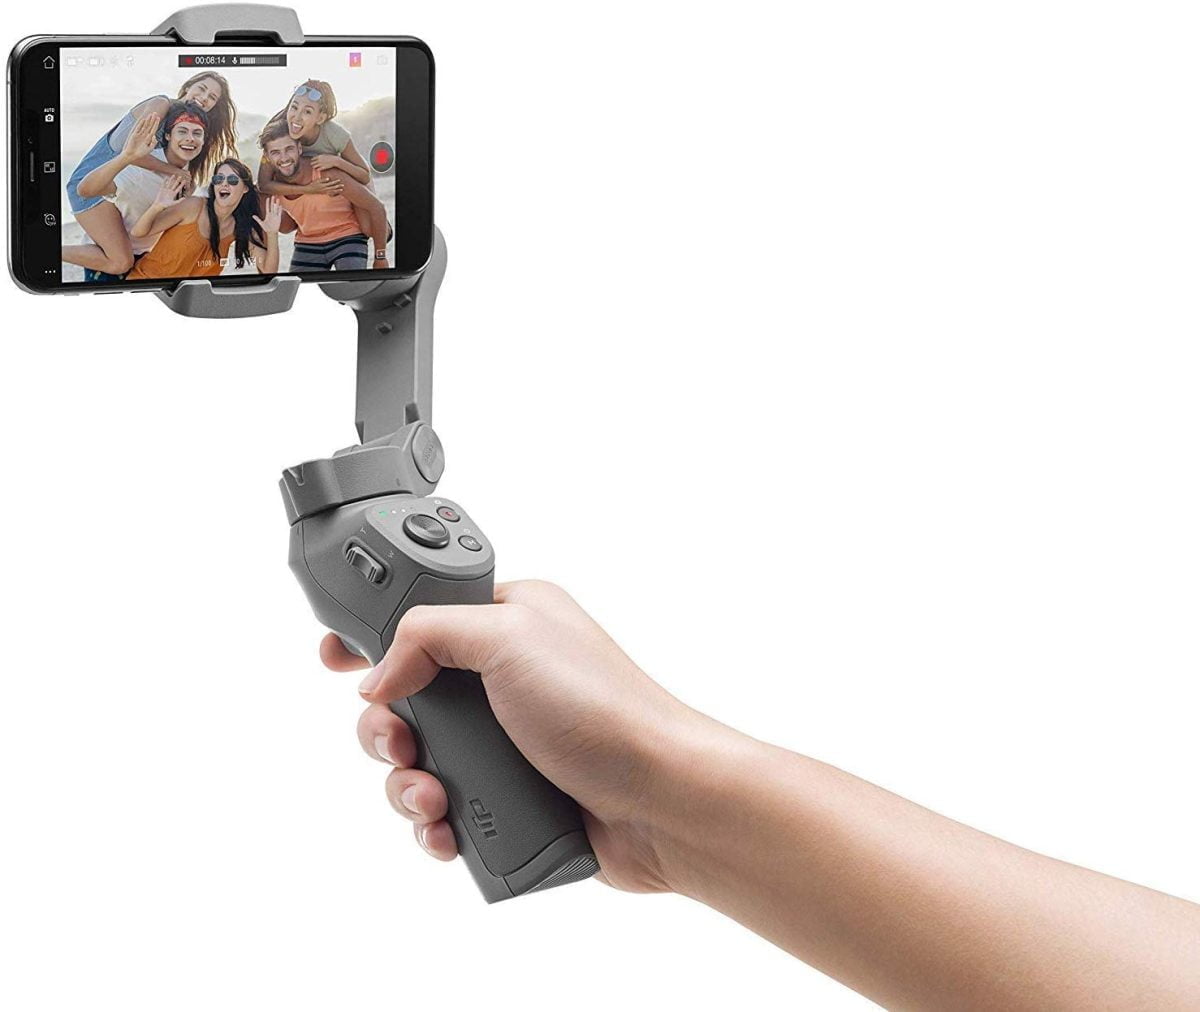 61J39Zabhql. Ac Sl1500 Dji &Lt;A Href=&Quot;Https://Www.dji.com/Ae/Osmo-Mobile-3?From=Store-Product-Page&Quot;&Gt;Osmo Mobile 3 Official Product Page&Lt;/A&Gt; &Lt;H1 Class=&Quot;Product-Name Logo&Quot;&Gt; Osmo Mobile 3 Combo&Lt;/H1&Gt; &Lt;Div Class=&Quot;Product-Cover&Quot;&Gt; &Lt;Img Class=&Quot;Alignnone Size-Medium Wp-Image-5354&Quot; Src=&Quot;Https://Lablaab.com/Wp-Content/Uploads/2019/11/Annotation-2019-11-05-113239-300X92.Jpg&Quot; Alt=&Quot;&Quot; Width=&Quot;300&Quot; Height=&Quot;92&Quot; /&Gt; 1. Slow Motion Is Currently Only Supported By Ios Devices. 2. You Can Also Transition Between Portrait And Landscape Mode By Rotating The Roll Axis Manually. 3. Activate This Function In Settings. By Default, If You Press The M Button Once, You Can Quickly Switch Between Taking A Photo And Recording A Video. &Lt;/Div&Gt; Dji Osmo Mobile 3 Combo